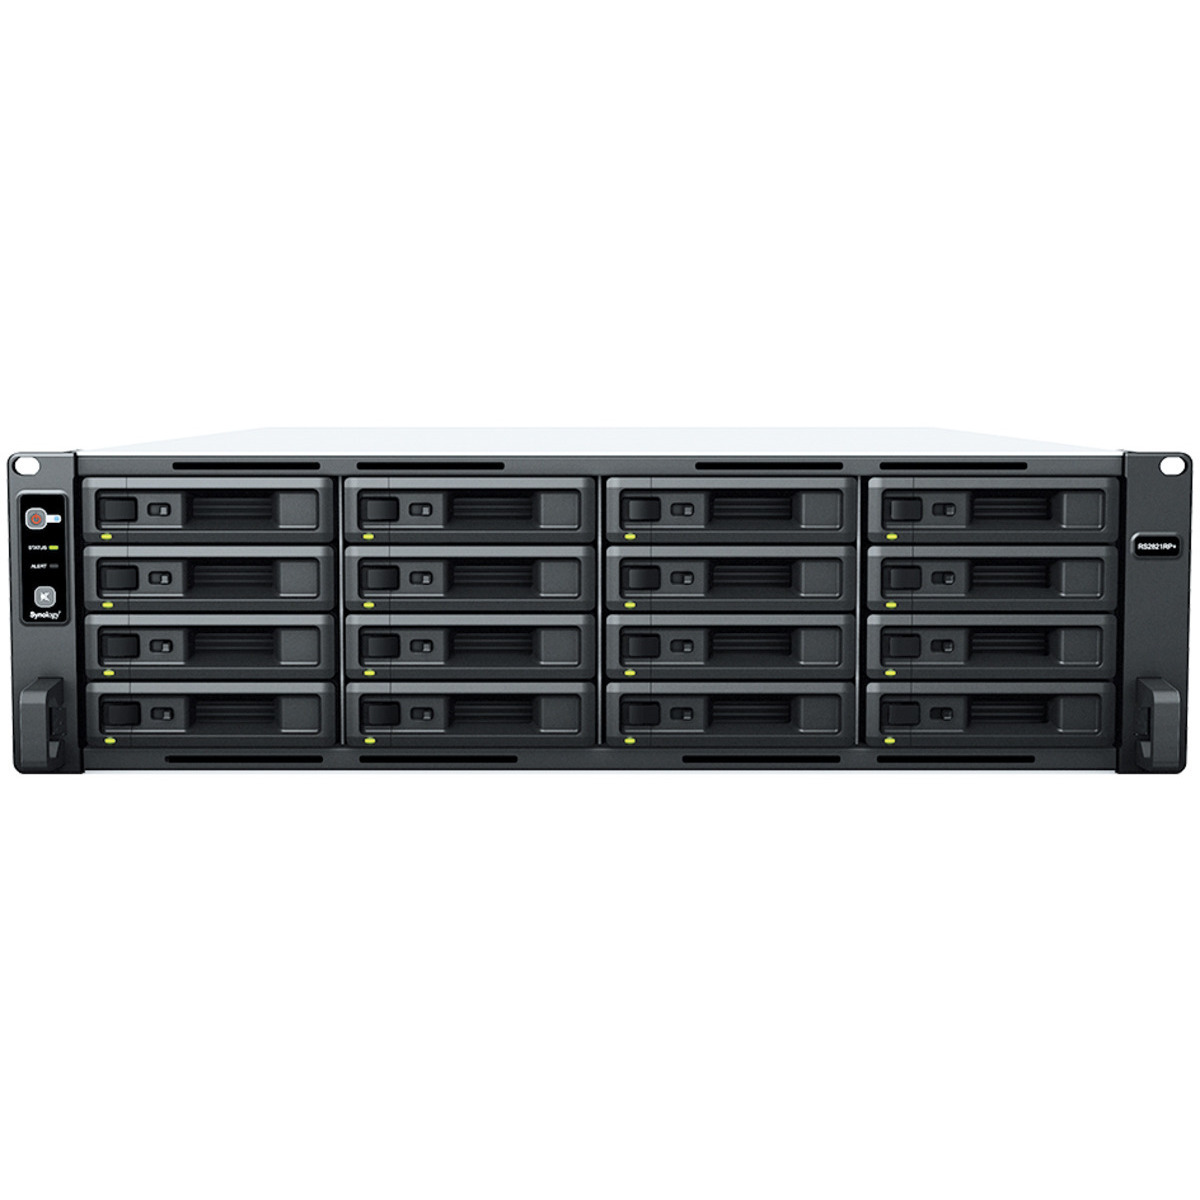 buy $7991 Synology RackStation RS2821RP+ 128tb RackMount NAS - Network Attached Storage Device 16x8000gb Western Digital Ultrastar DC HC320 HUS728T8TALE6L4 3.5 7200rpm SATA 6Gb/s HDD ENTERPRISE Class Drives Installed - Burn-In Tested - nas headquarters buy network attached storage server device das new raid-5 free shipping usa christmas new year holiday sale RackStation RS2821RP+